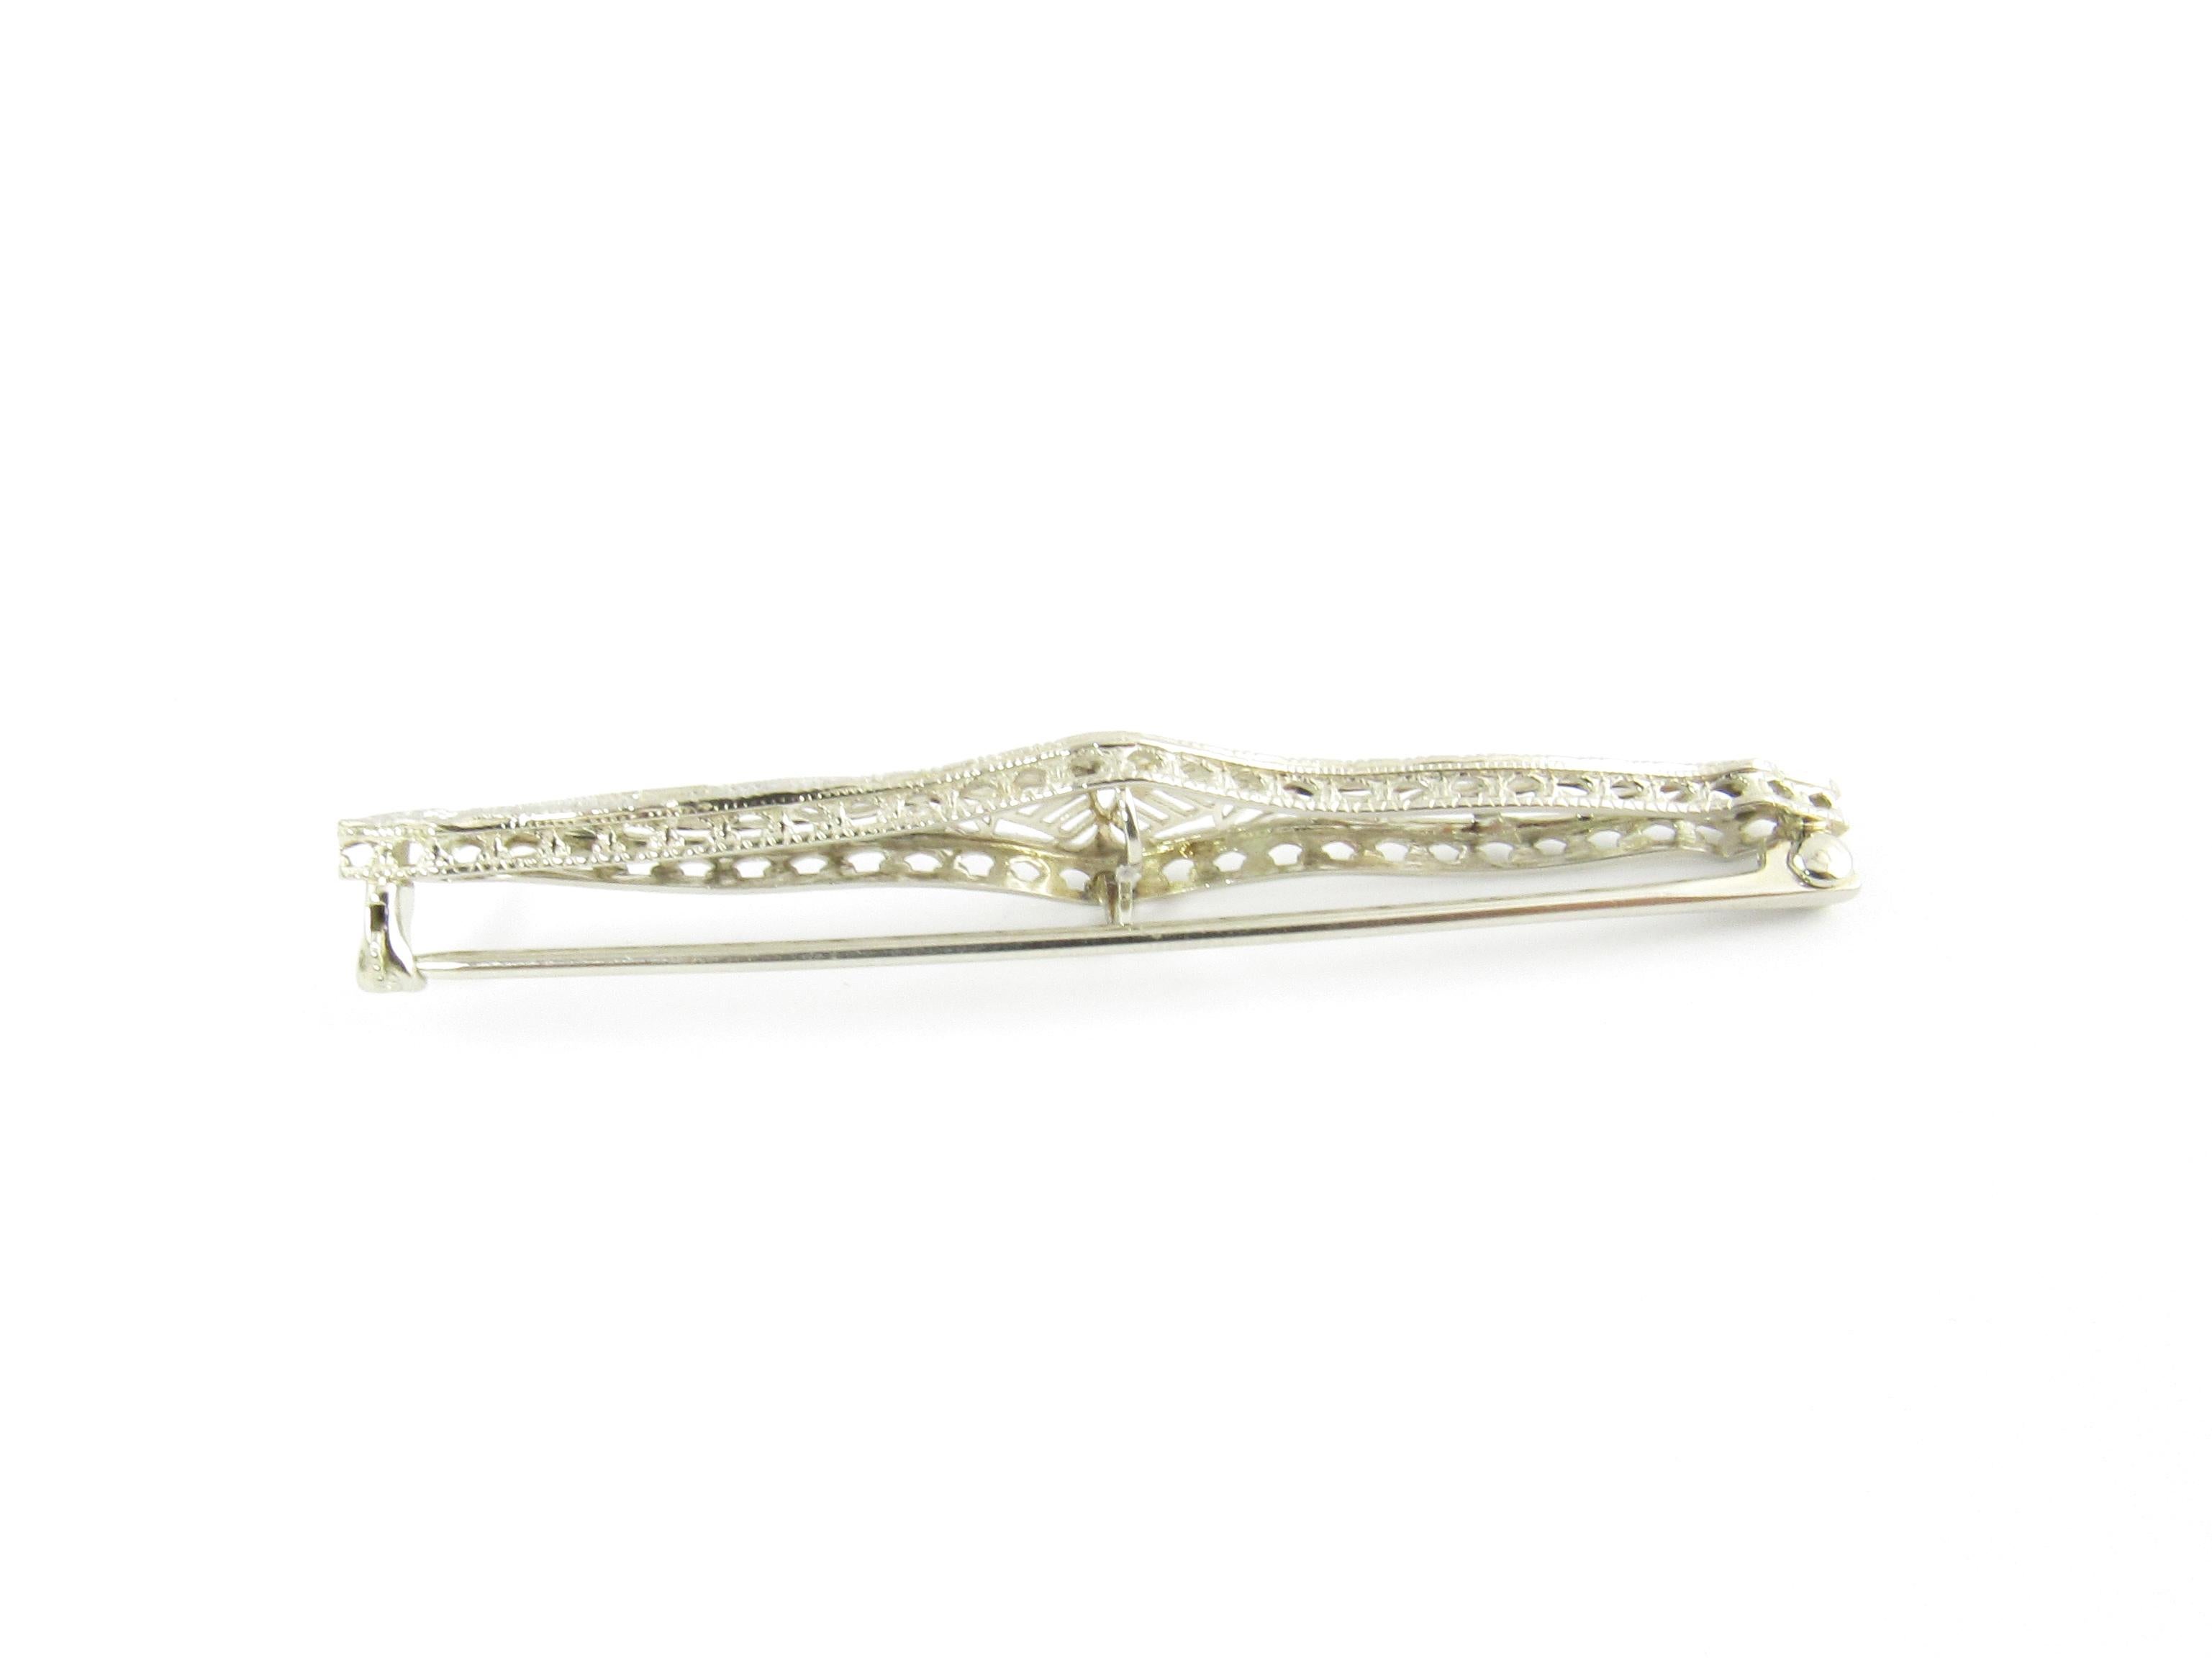 Vintage 14 Karat White Gold Filigree Bar Pin

This elegant bar pin is crafted in beautifully detailed white gold filigree.

Size: 59 mm x 9 mm

Weight: 2.2 dwt. / 3.5 gr.

Stamped: 14K

Very good condition, professionally polished. Will come